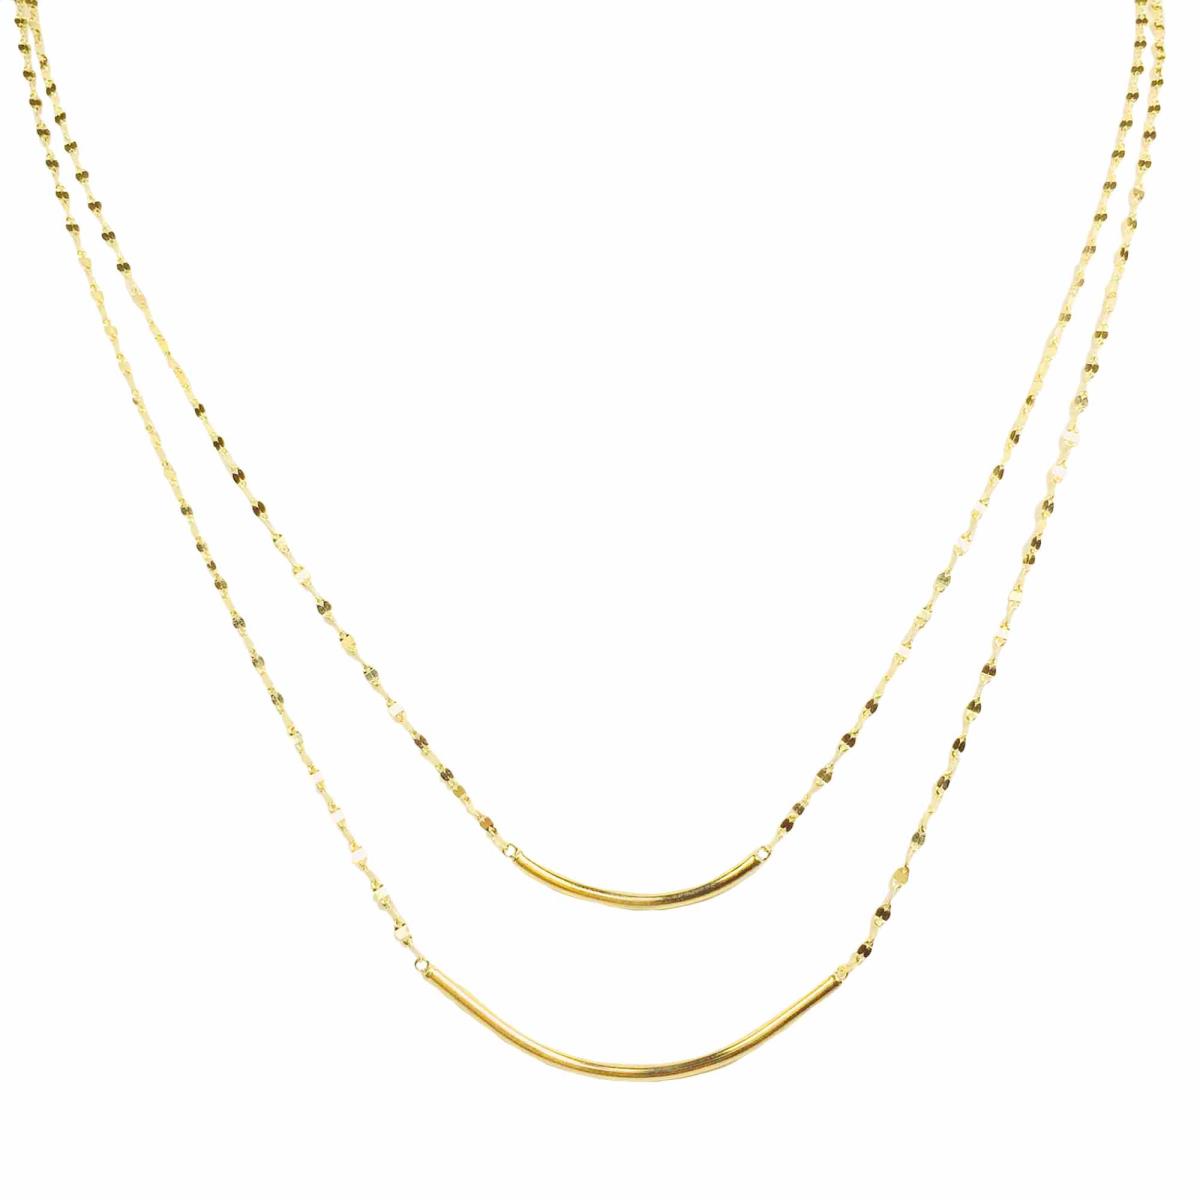 14K Yellow Gold DC Twist Polished Tube Double Layer 18" Necklace